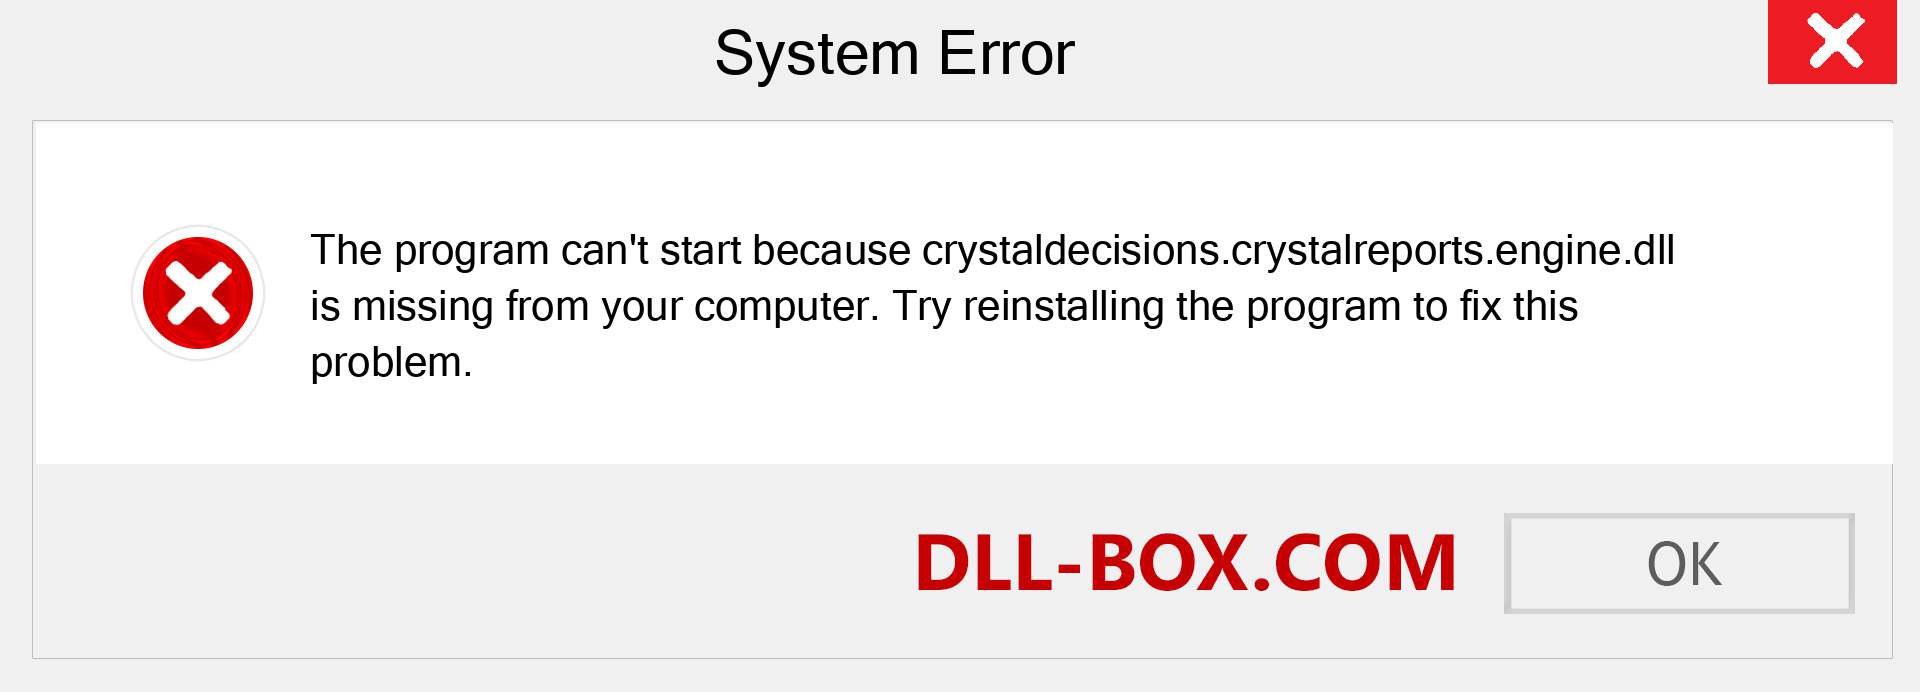  crystaldecisions.crystalreports.engine.dll file is missing?. Download for Windows 7, 8, 10 - Fix  crystaldecisions.crystalreports.engine dll Missing Error on Windows, photos, images